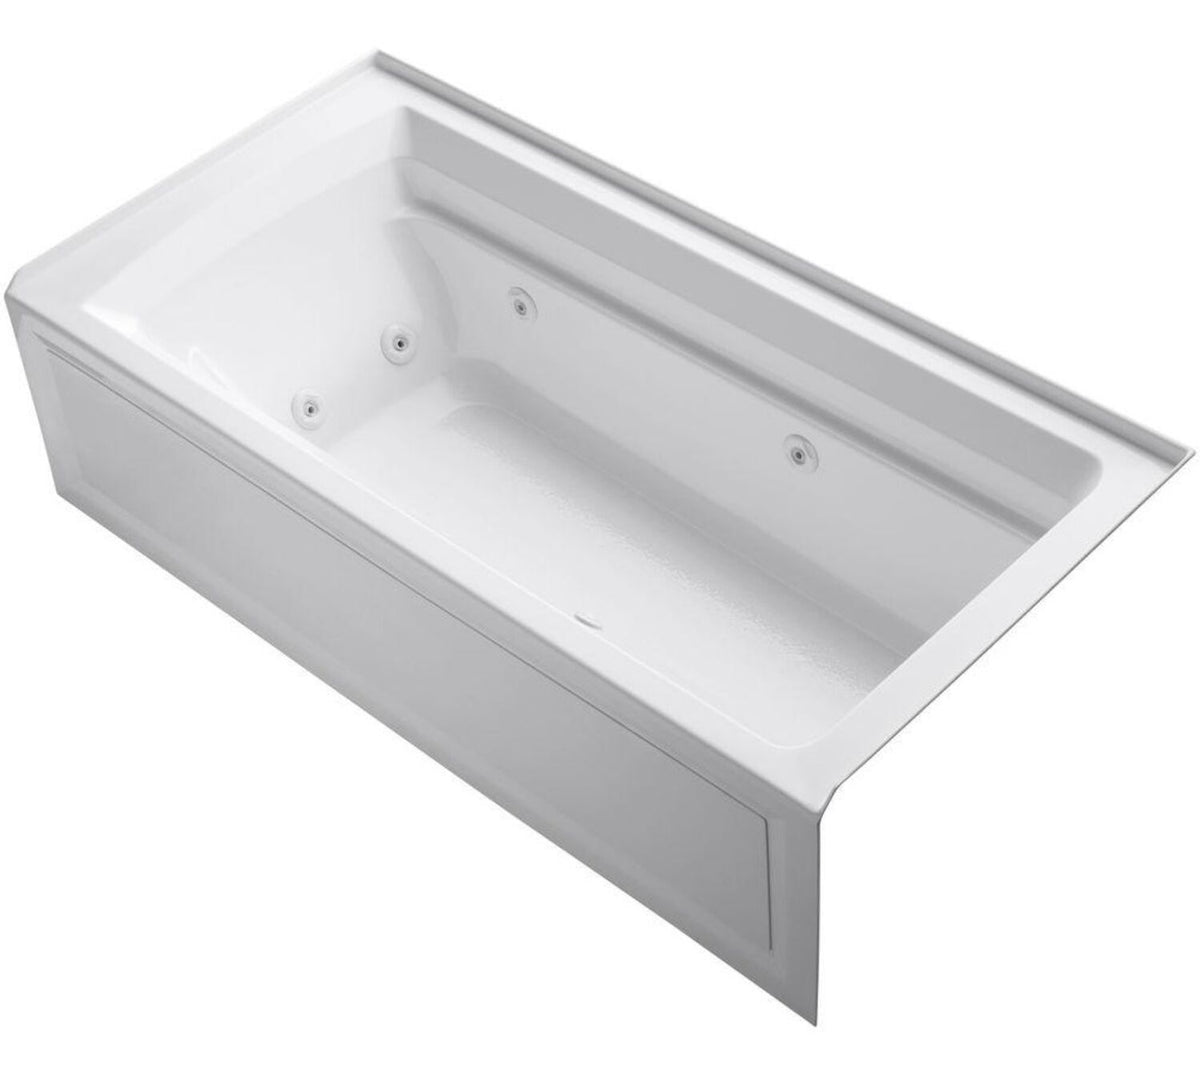 ARCHER® 72 X 36 INCHES ALCOVE WHIRLPOOL WITH INTEGRAL APRON AND RIGHT-HAND DRAIN